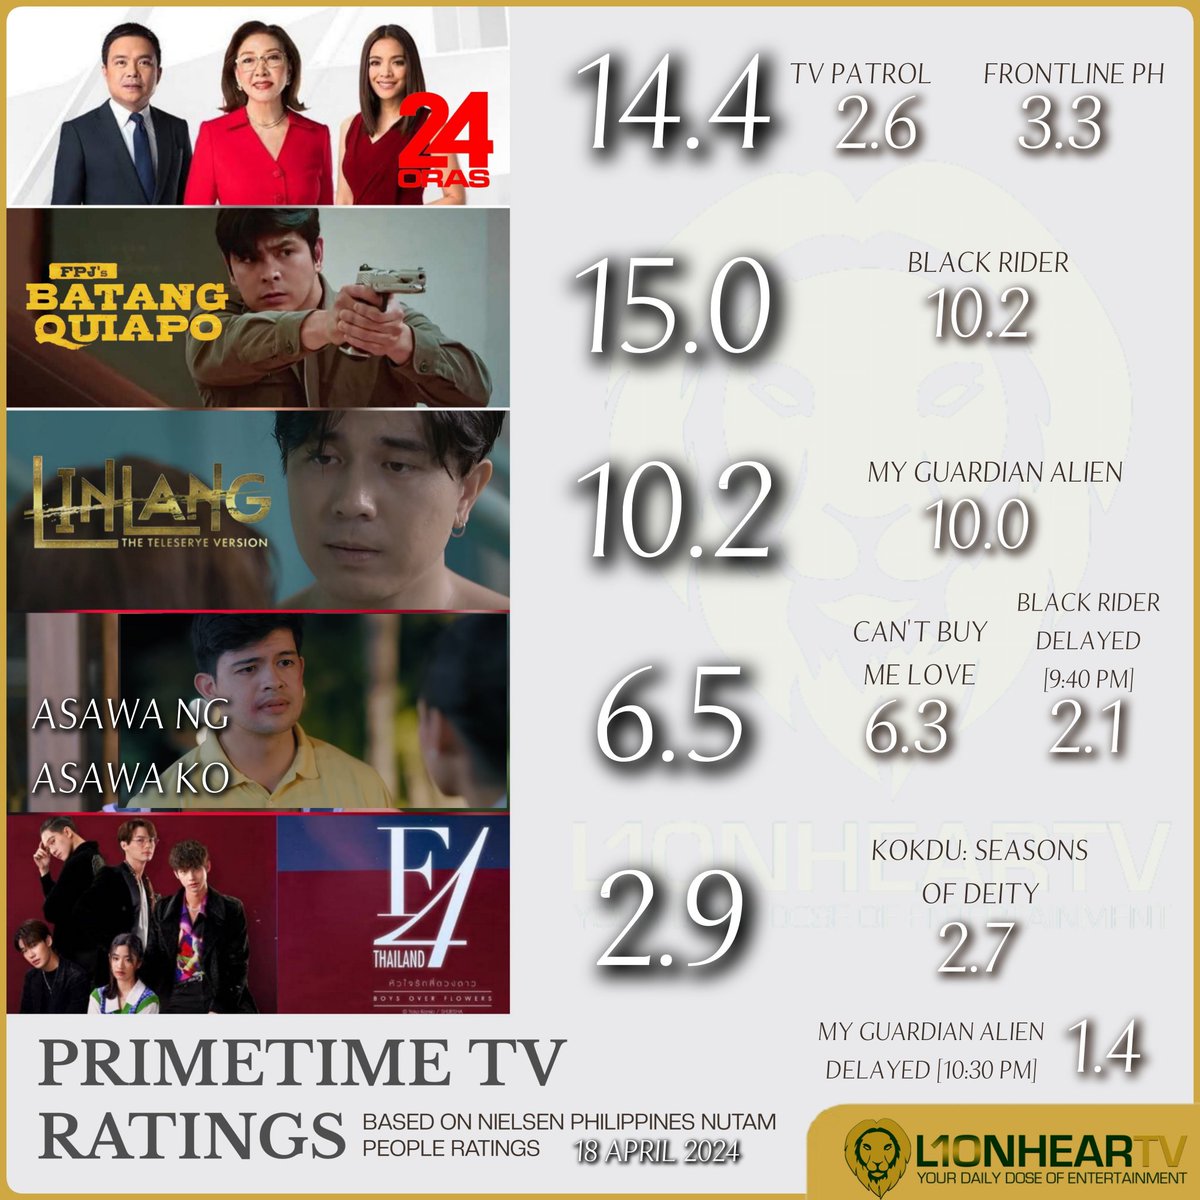 Here are the primetime ratings for yesterday, April 18, according to Nielsen Philippines. MORE RATINGS: lionheartv.net/ratings